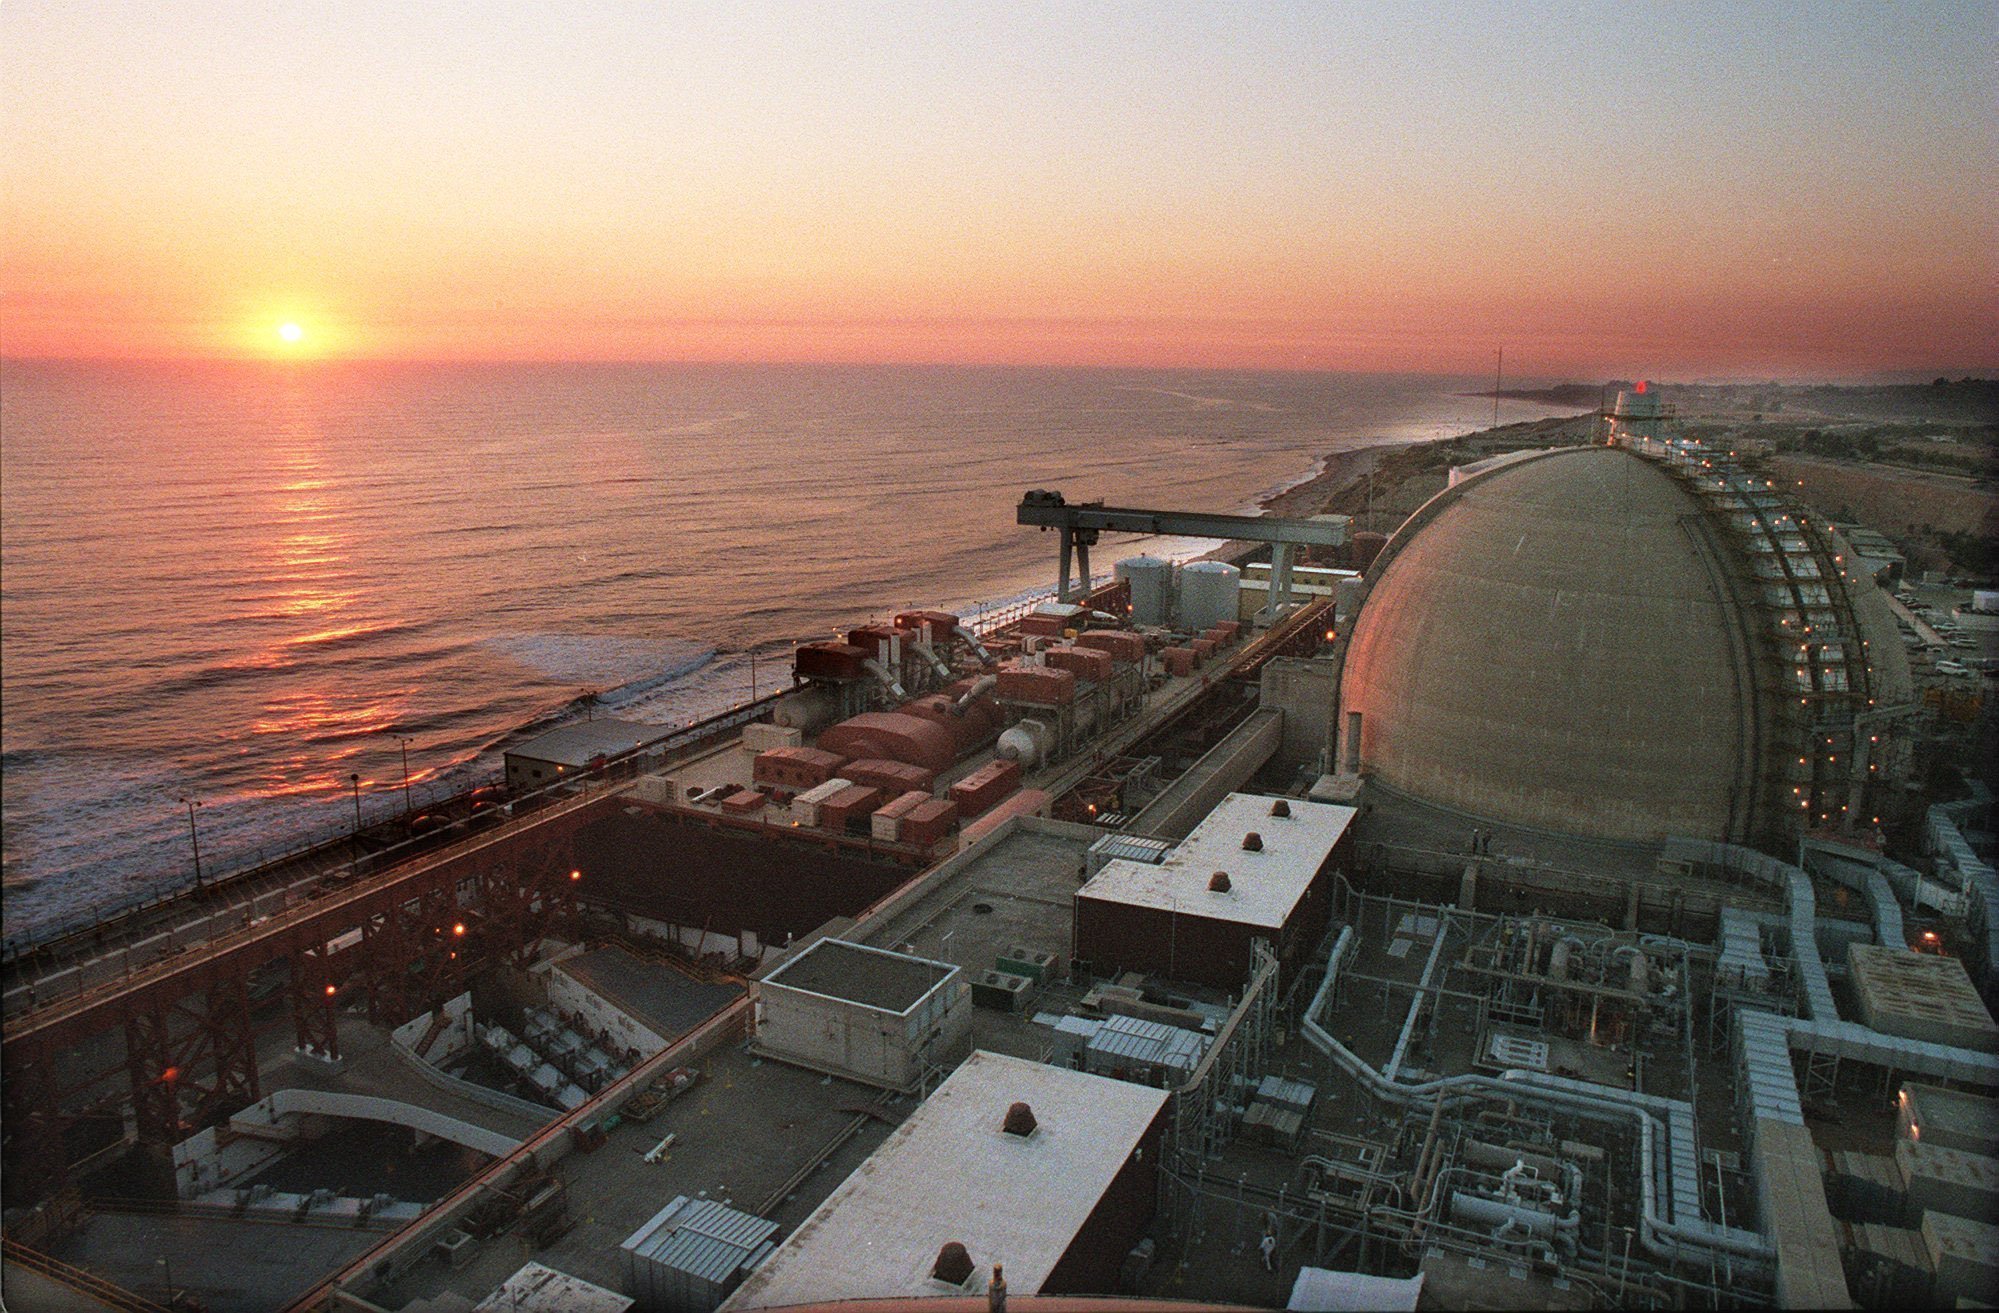 Coastal Commission pushes San Onofre hearing to August - The ... - The San Diego Union-Tribune